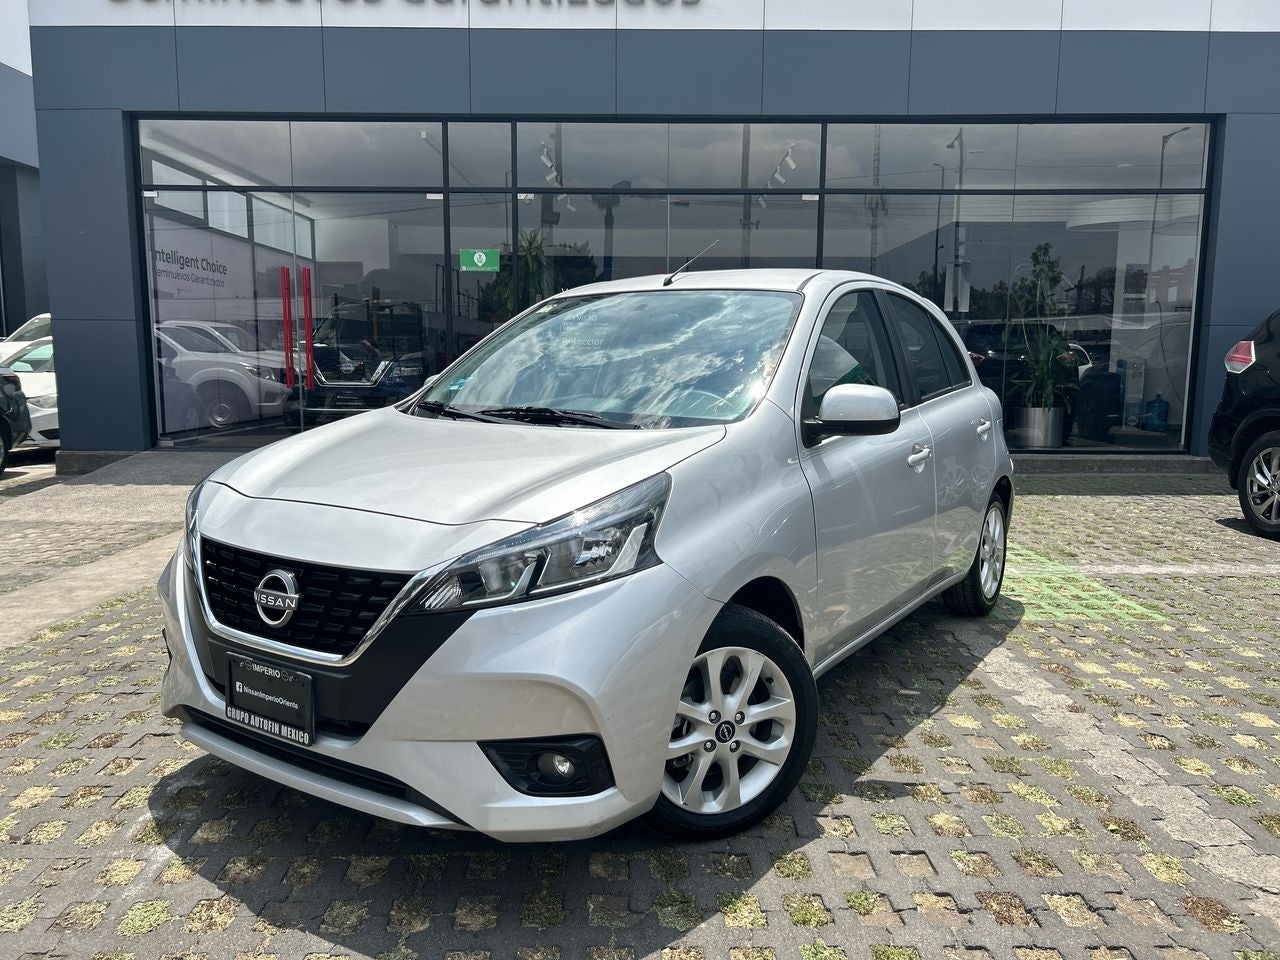 2022 Nissan MARCH 5 PTS HB ADVANCE TM5 AAC VE BA ABS RA-15